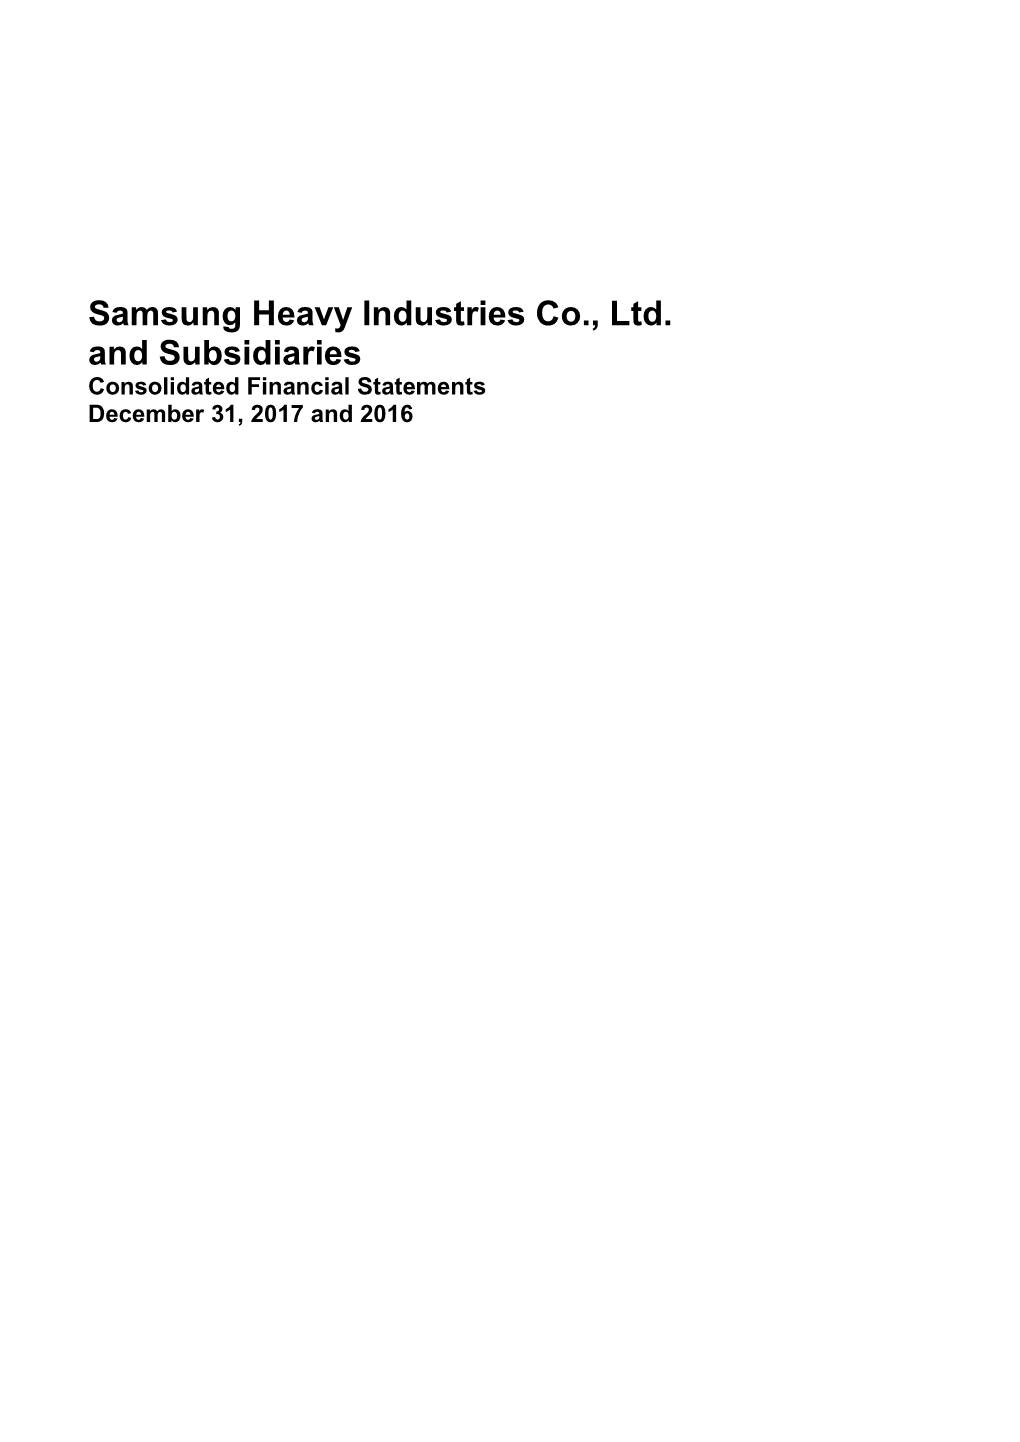 Samsung Heavy Industries Co., Ltd. and Subsidiaries Consolidated Financial Statements December 31, 2017 and 2016